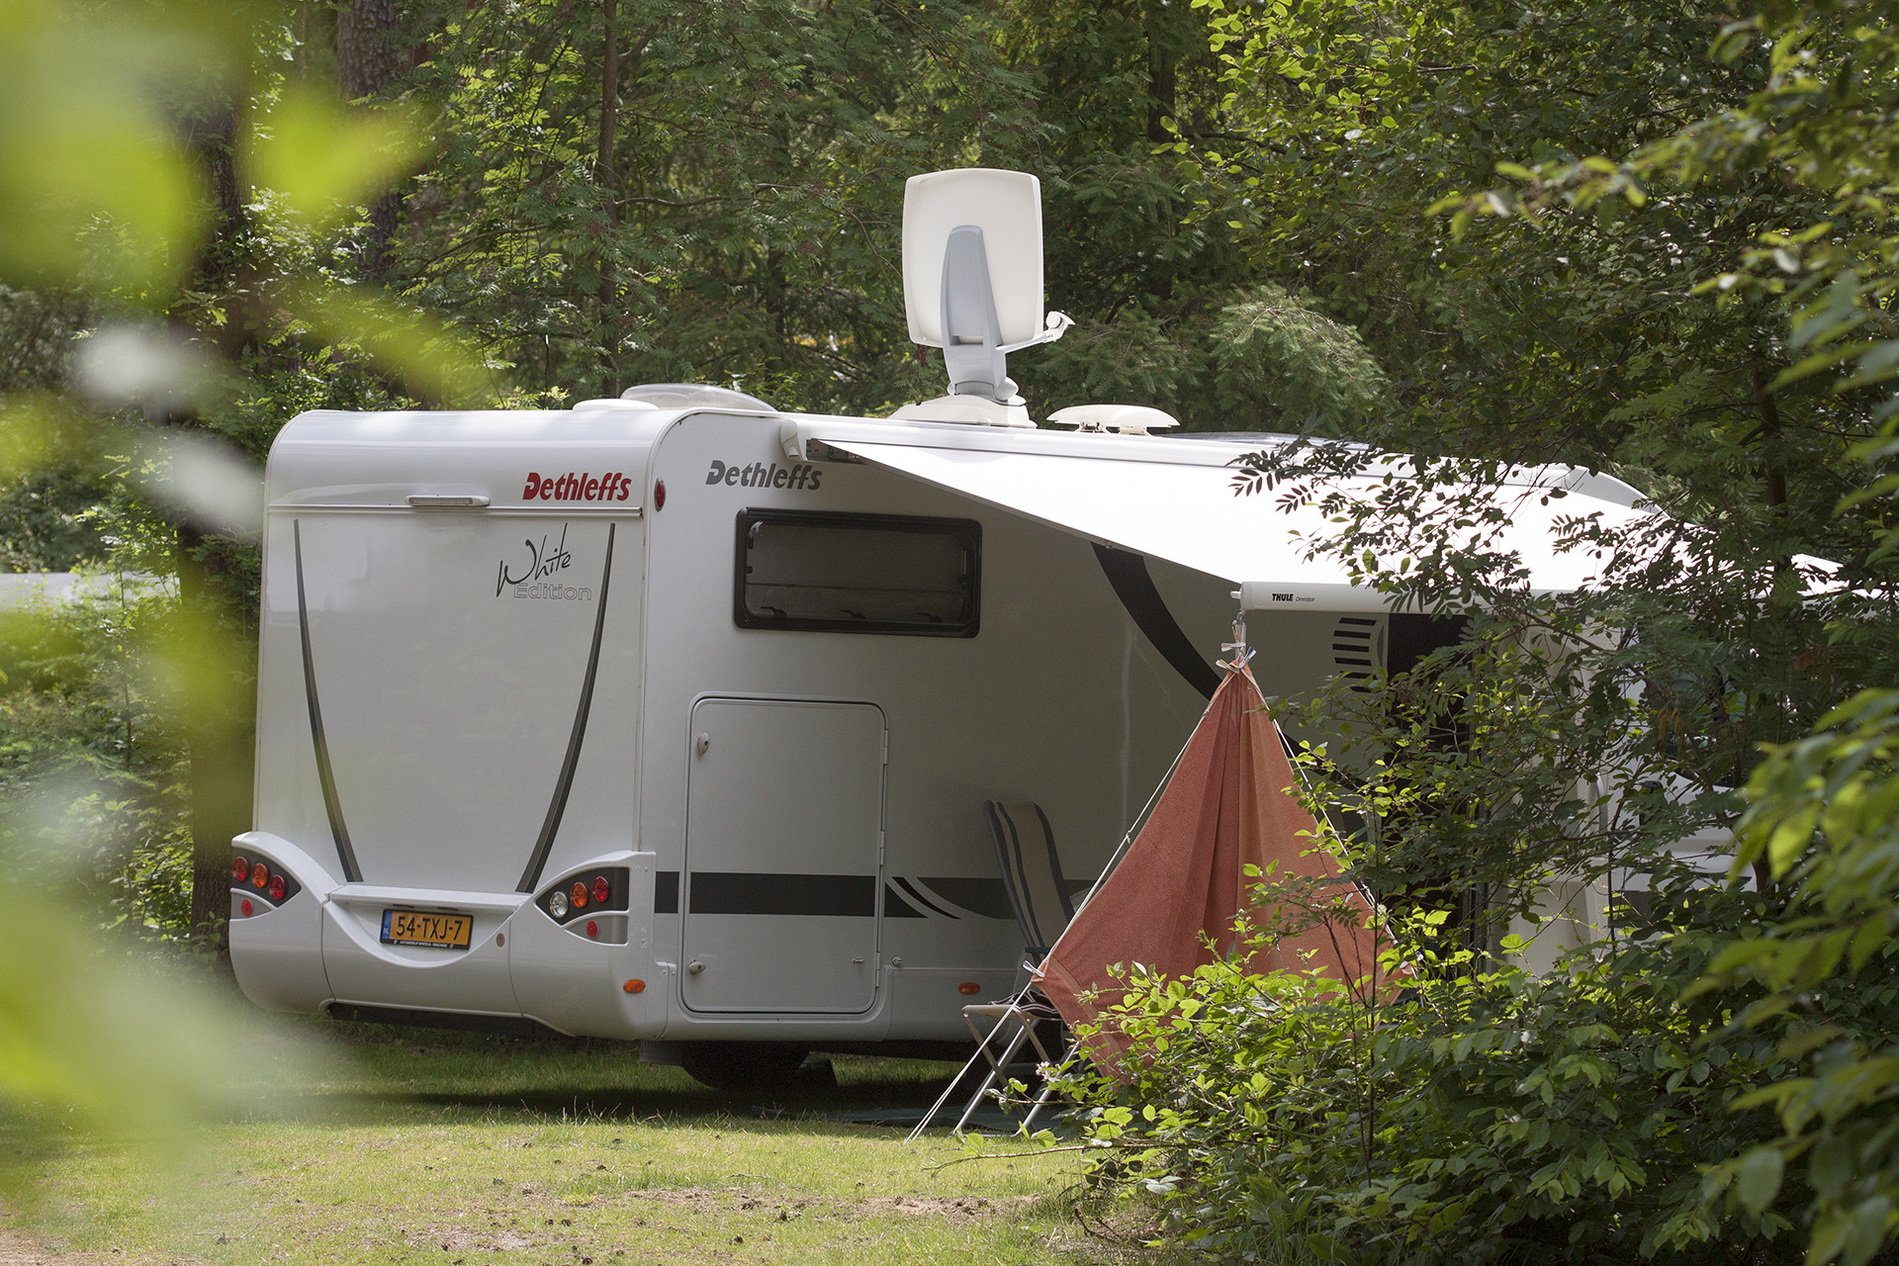 Camping Diever